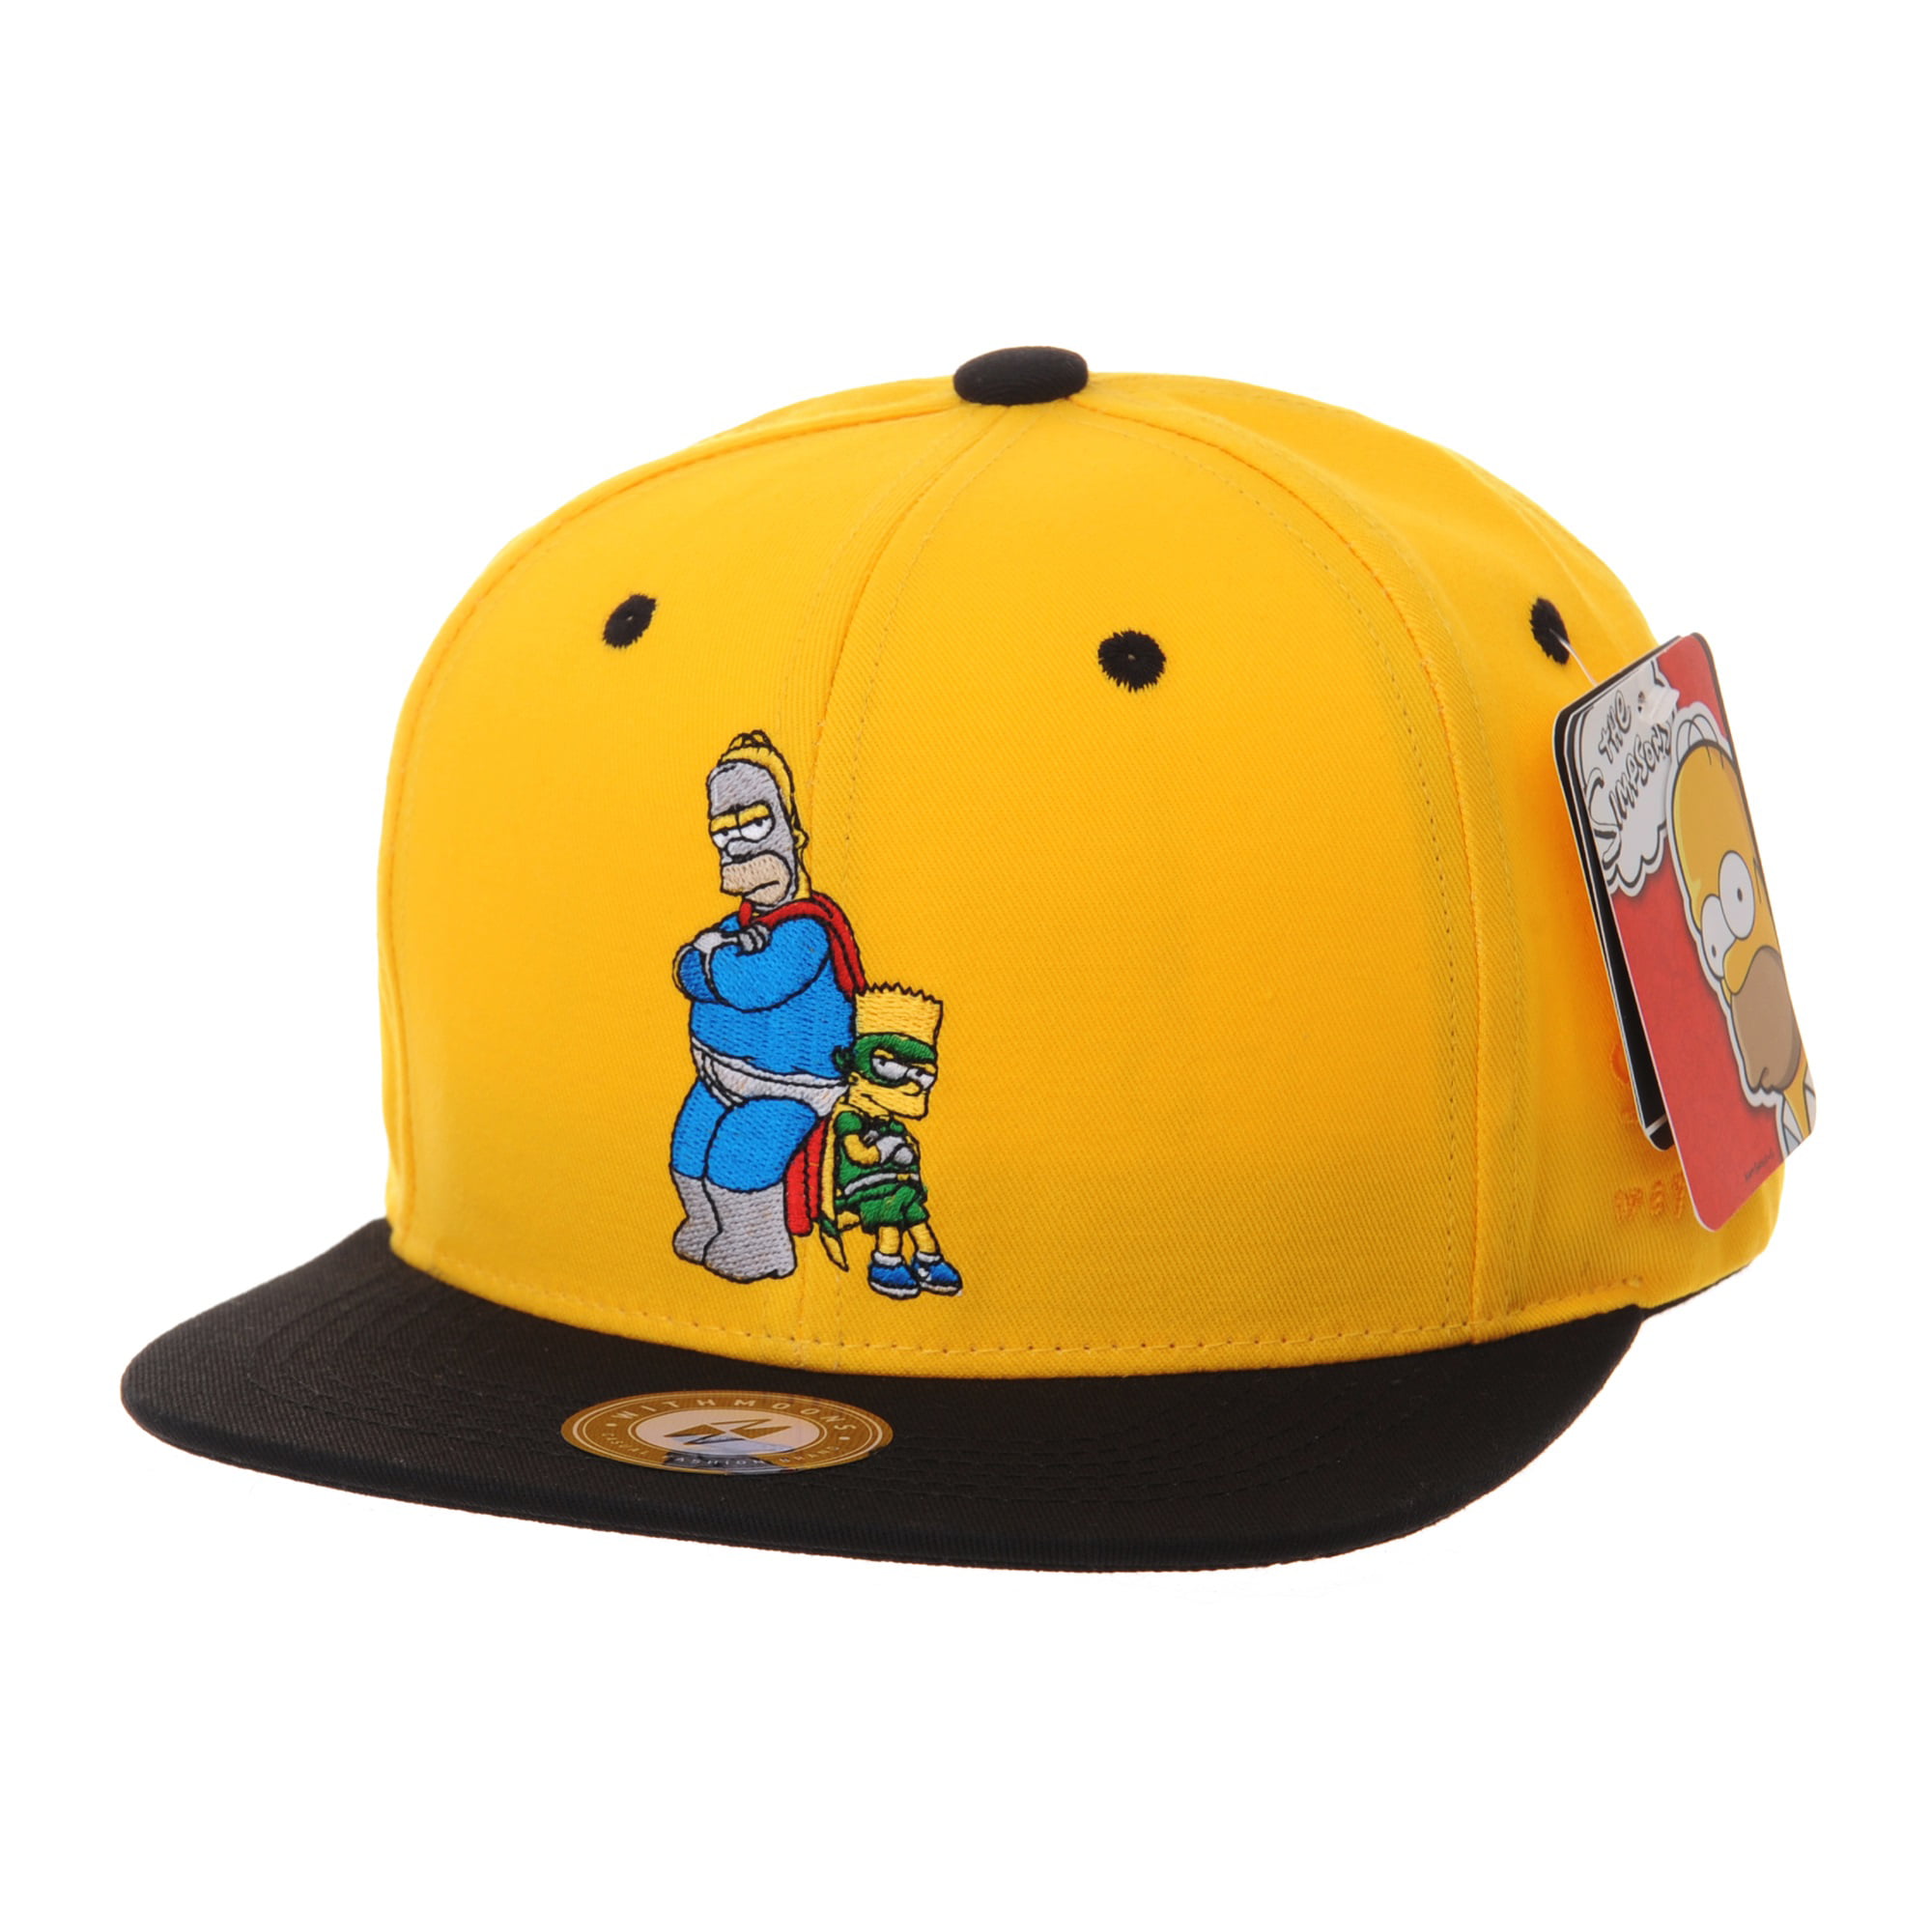 Cap WITHMOONS The Snapback Simpsons Superman (Yellow) Hat HL2657 Baseball